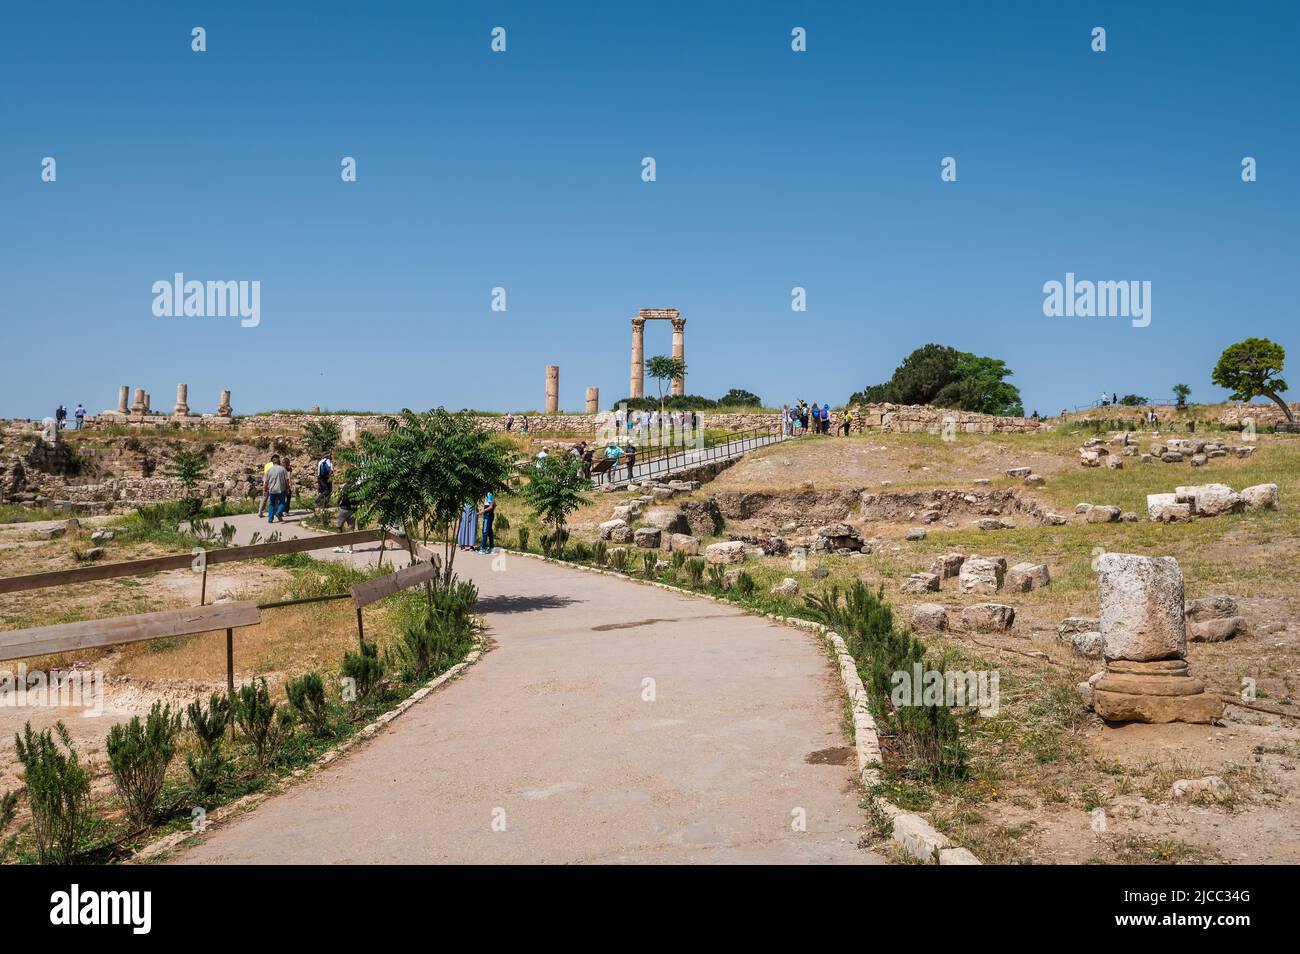 Amman, Jordan - May 2, 2022: Amman Citadel archeological site at the center of downtown Amman, the capital of Jordan on a sunny day with blue sky and Stock Photo